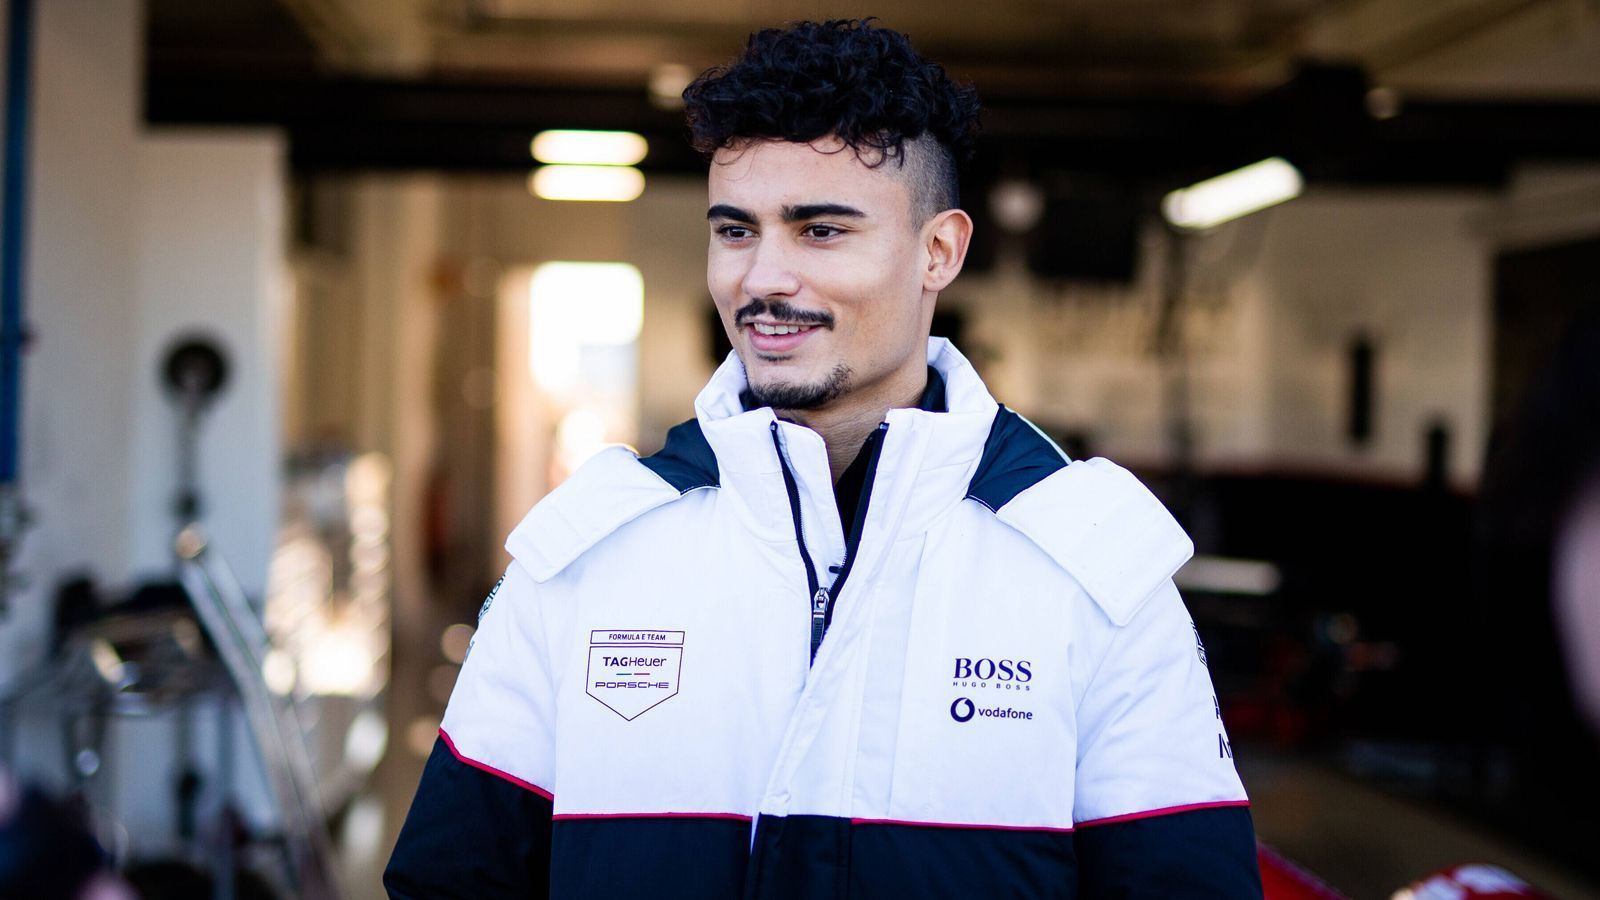 
                <strong>Pascal Wehrlein (2018 bis heute)</strong><br>
                &#x2022; 2018/19: Mahindra Racing, Platz 12 - <br>&#x2022; 2019/20: Mahindra Racing (1-5), Platz 18 -<br>&#x2022; 2020/21: TAG Heuer Porsche, Platz 11 -<br>&#x2022; 2021/22: TAG Heuer Porsche, Platz 10<br>&#x2022; 2023: TAG Heuer Porsche<br>
              